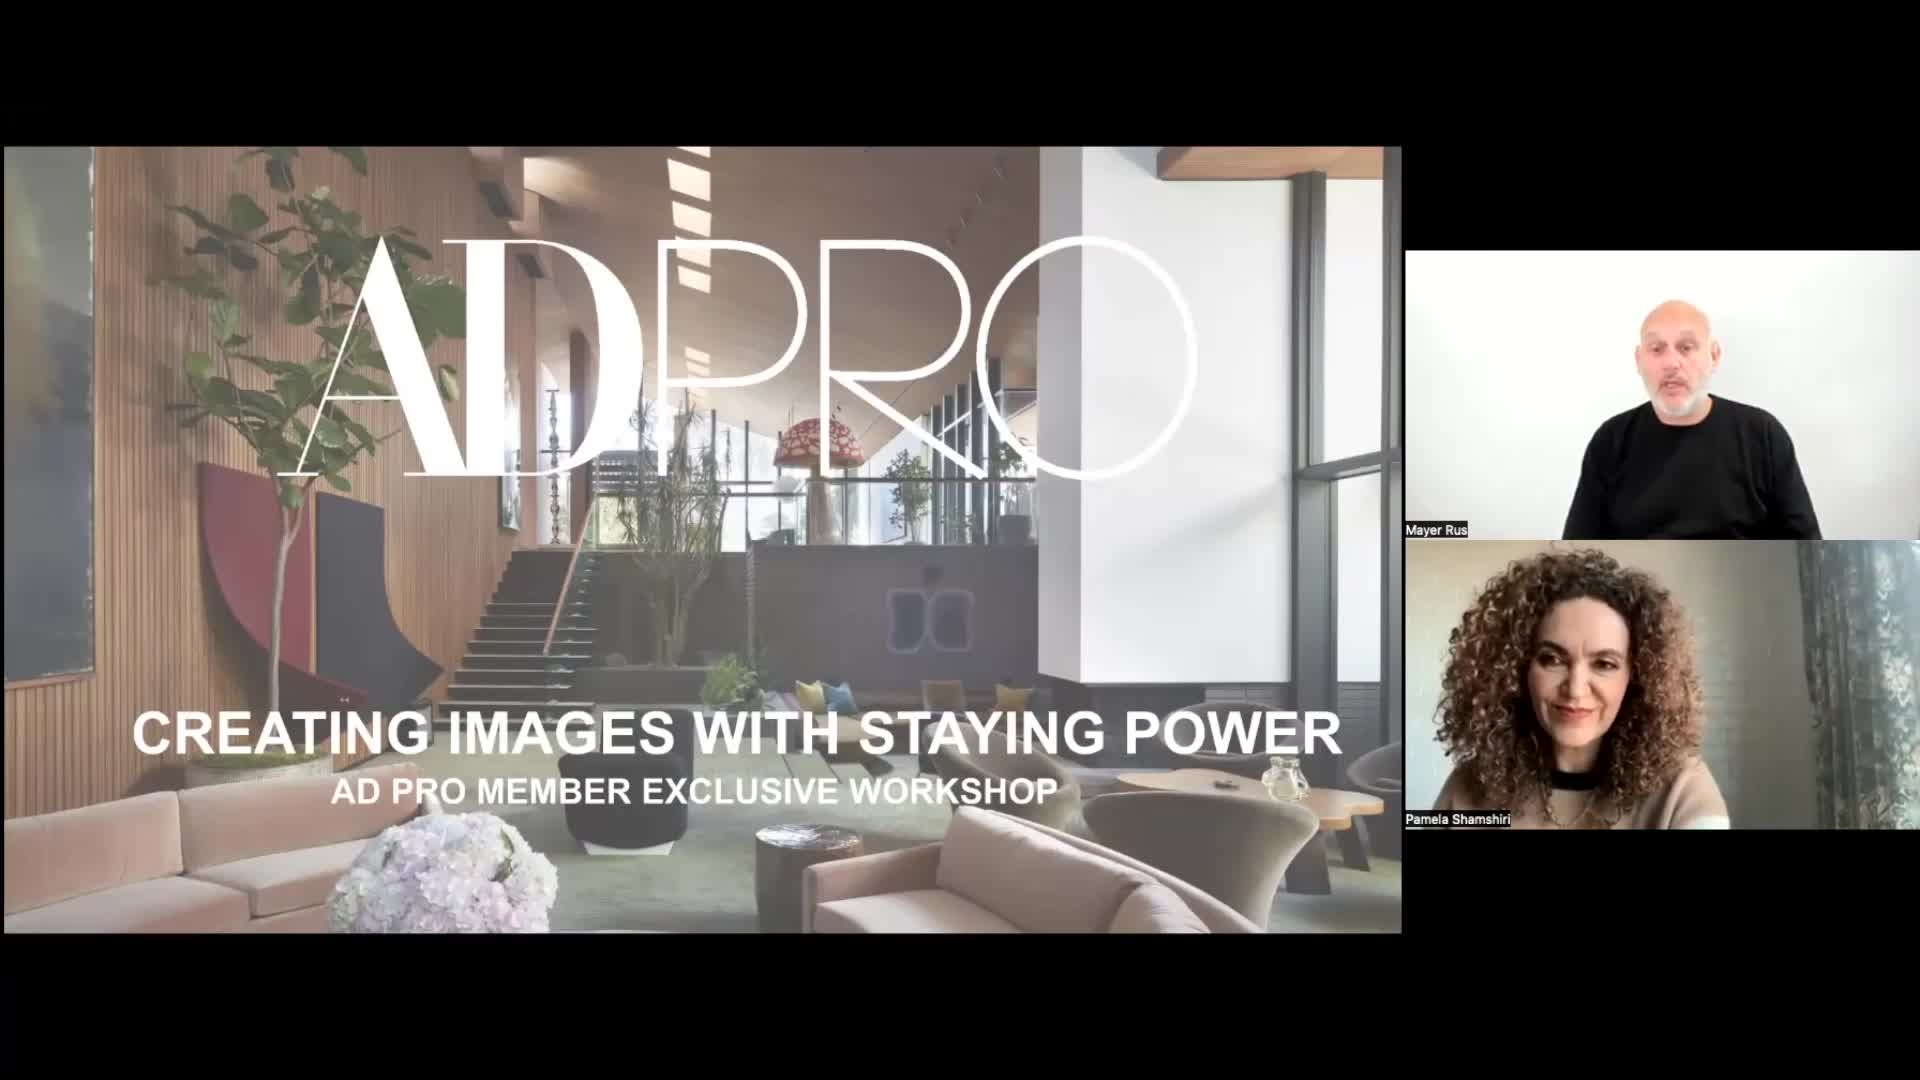 Watch Member Exclusive Workshop: Creating Images With Staying Power